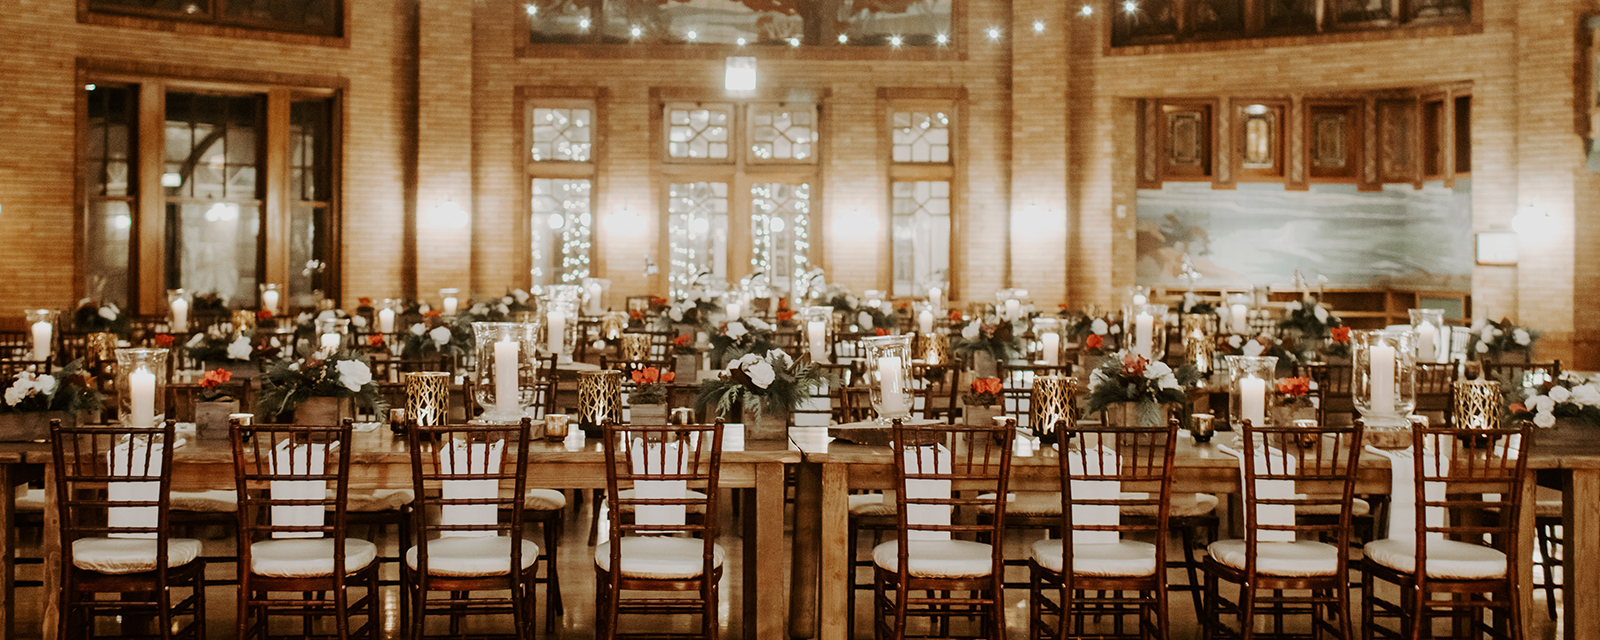 Interior of Cafe Brauer prior to a private event